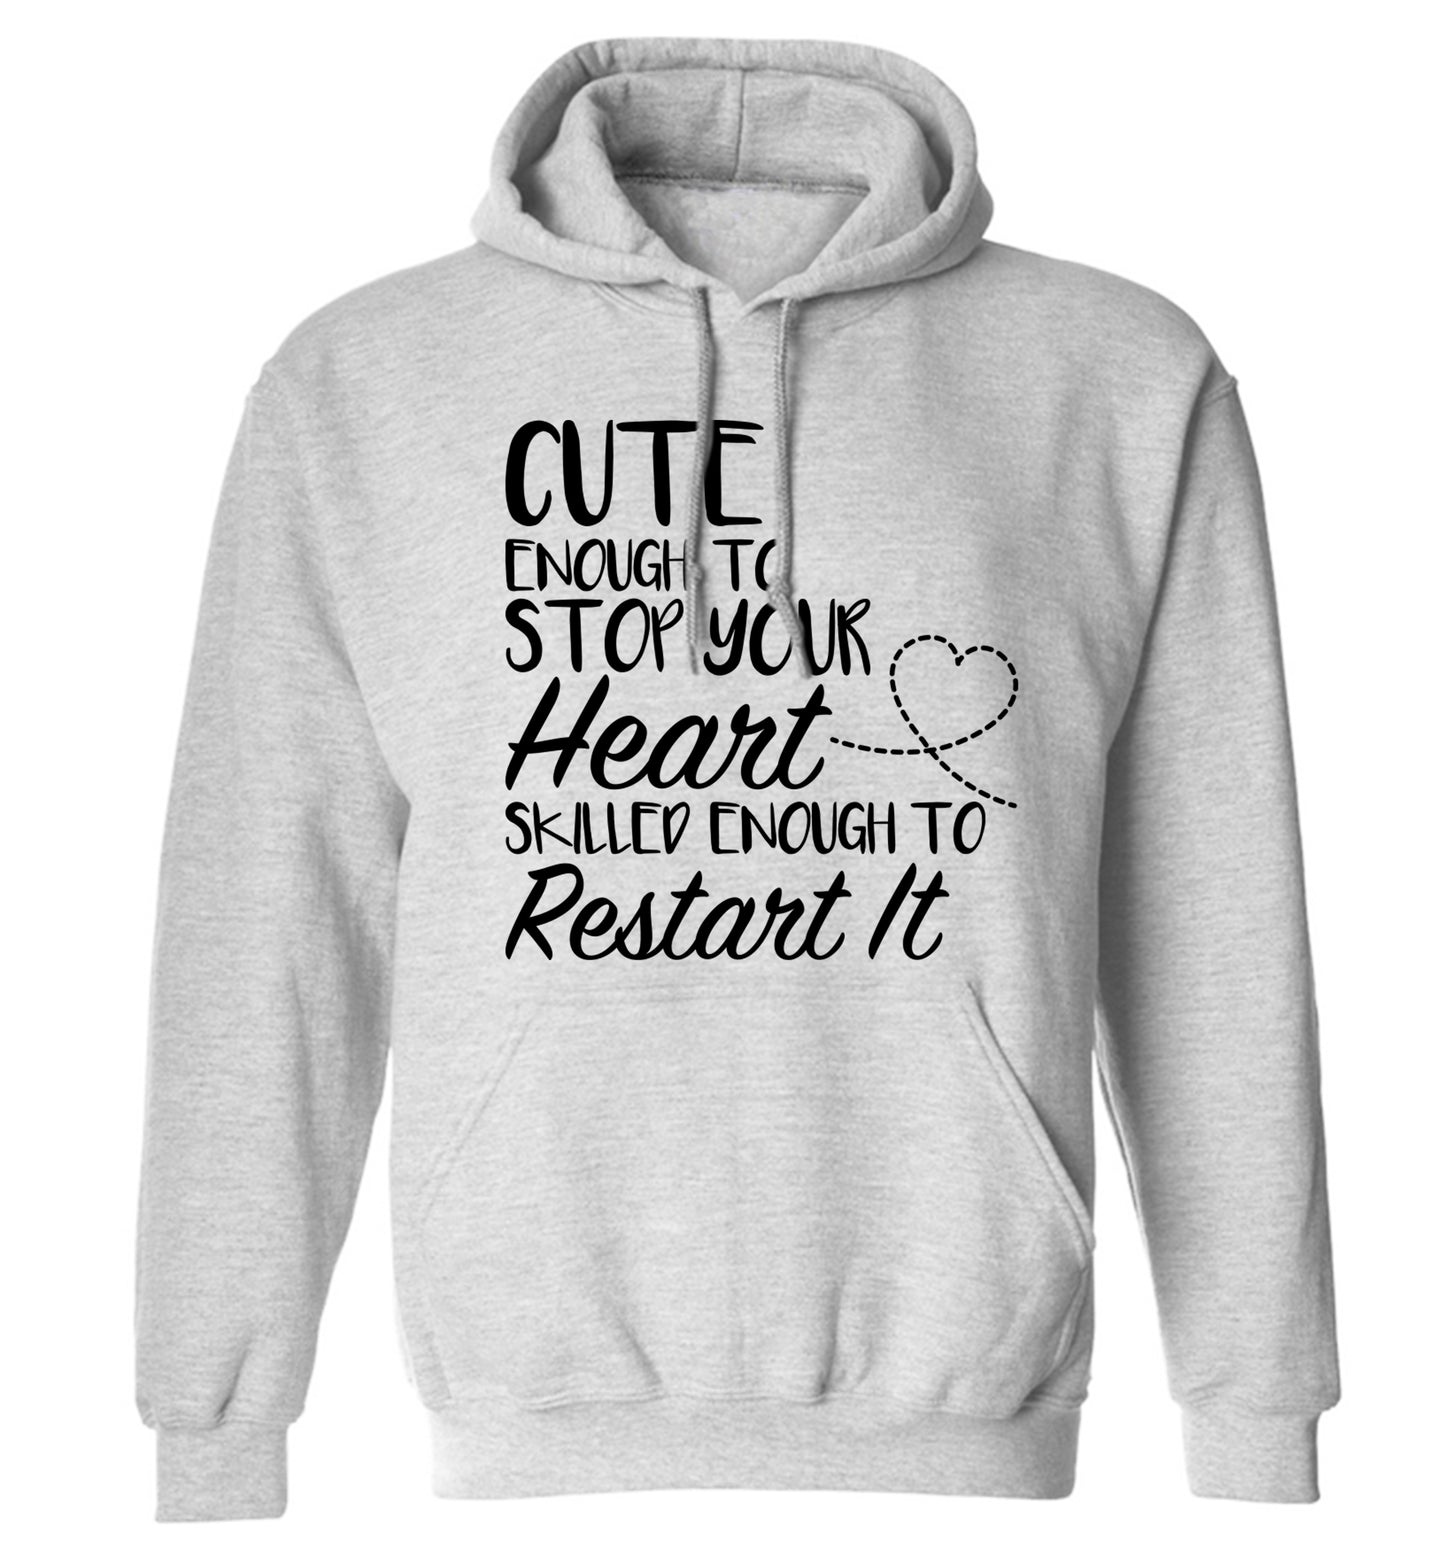 Cute enough to stop your heart skilled enough to restart it adults unisex grey hoodie 2XL